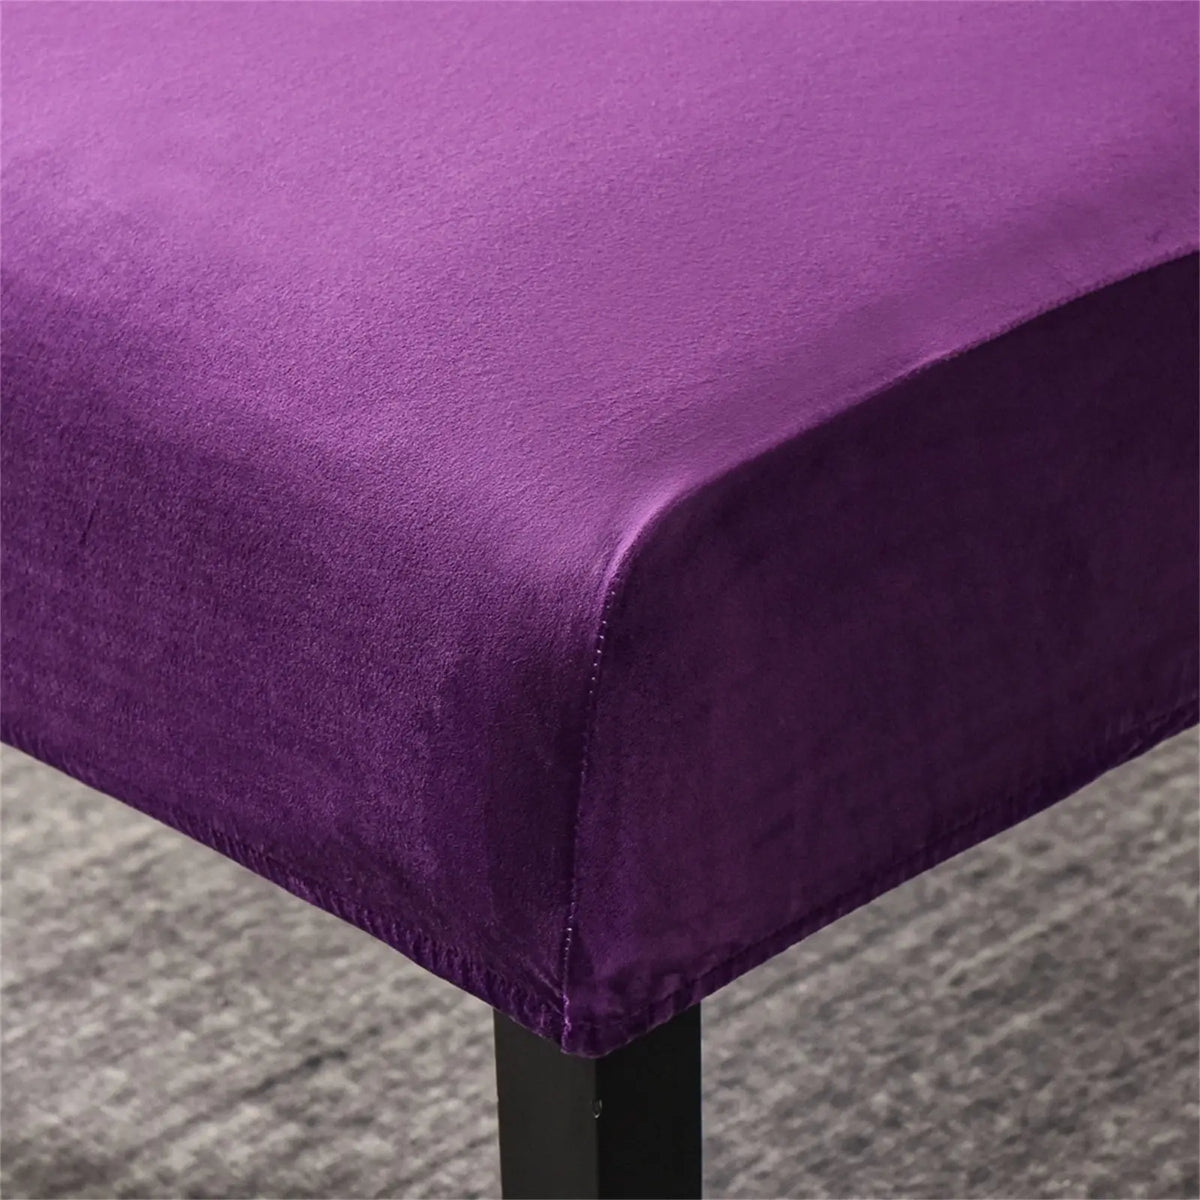 Chic Purple Wide Armless Accent Chair Cover Stretch One Pair Sofa Furniture Protector Covers Top Level Crfatop %sku%